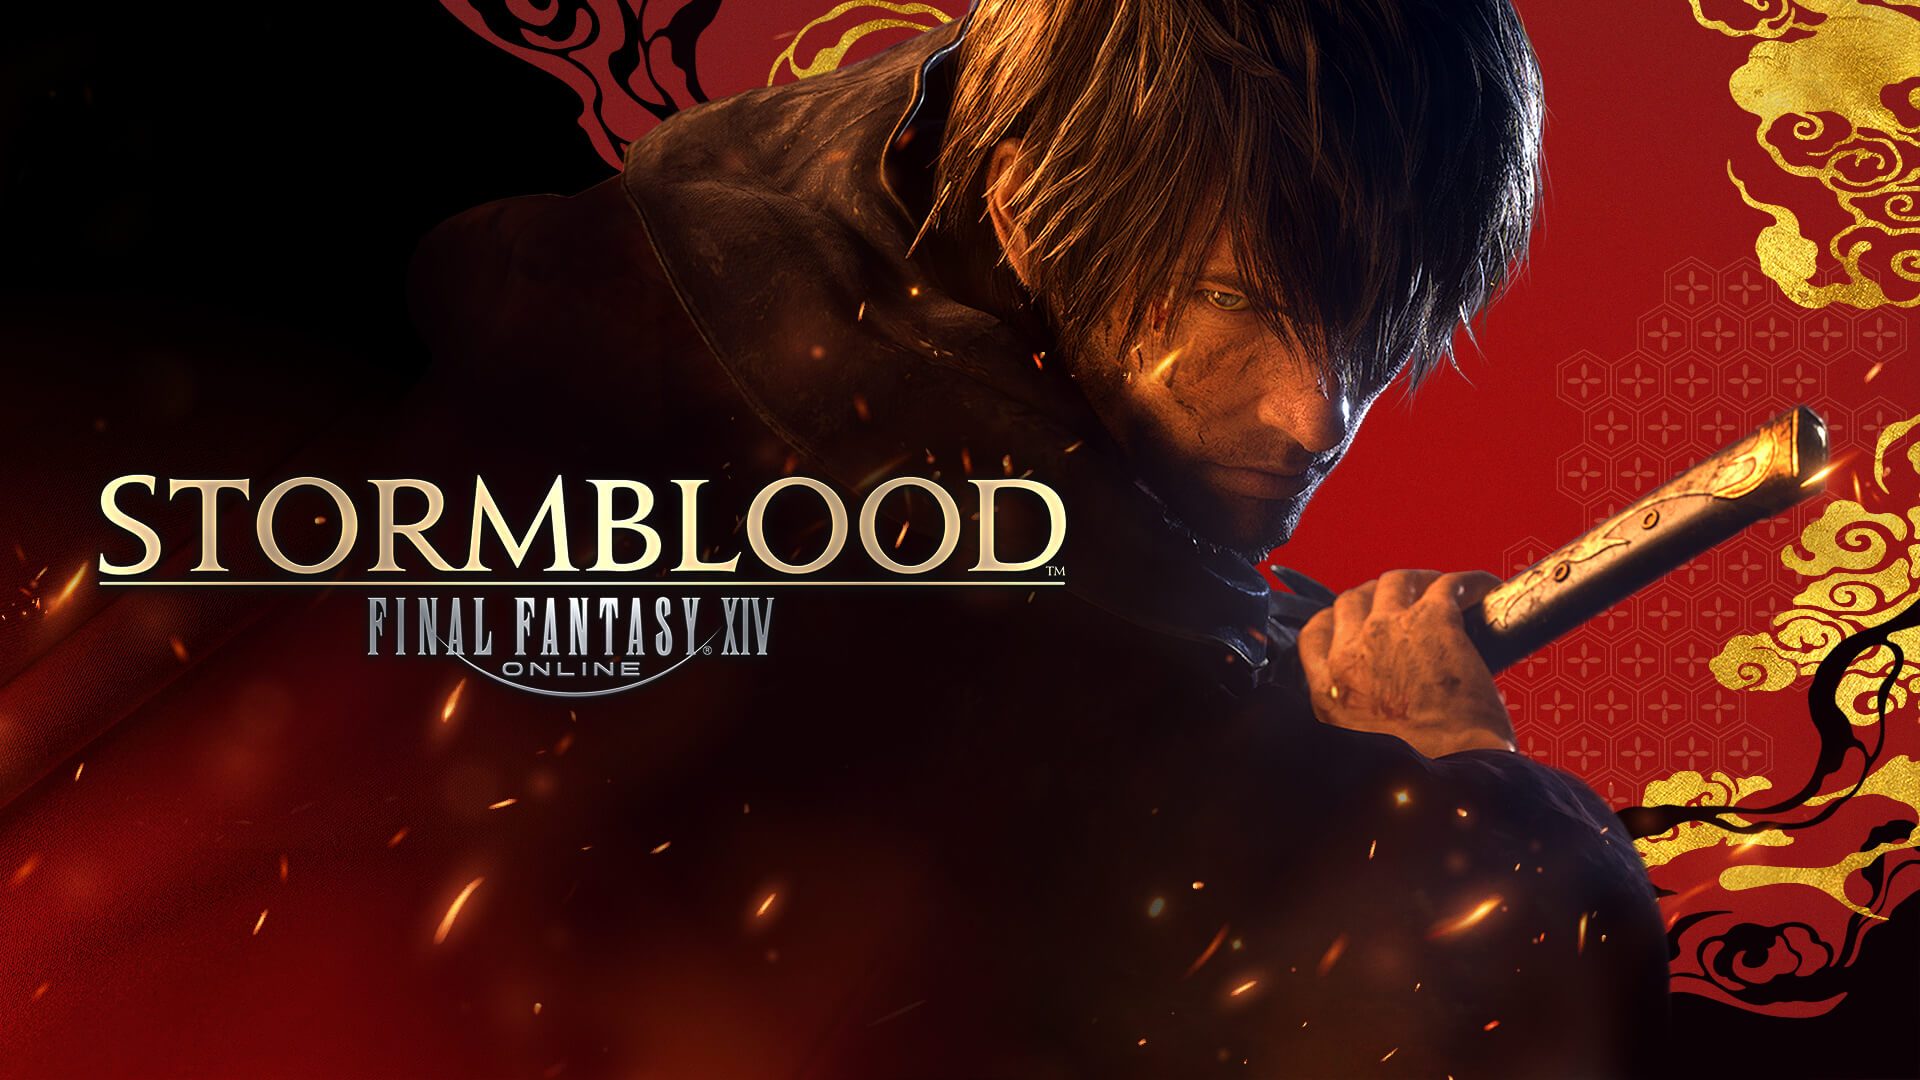 Final Fantasy XIV’s Stormblood expansion free for a limited time, starting today  – PlayStation.Blog